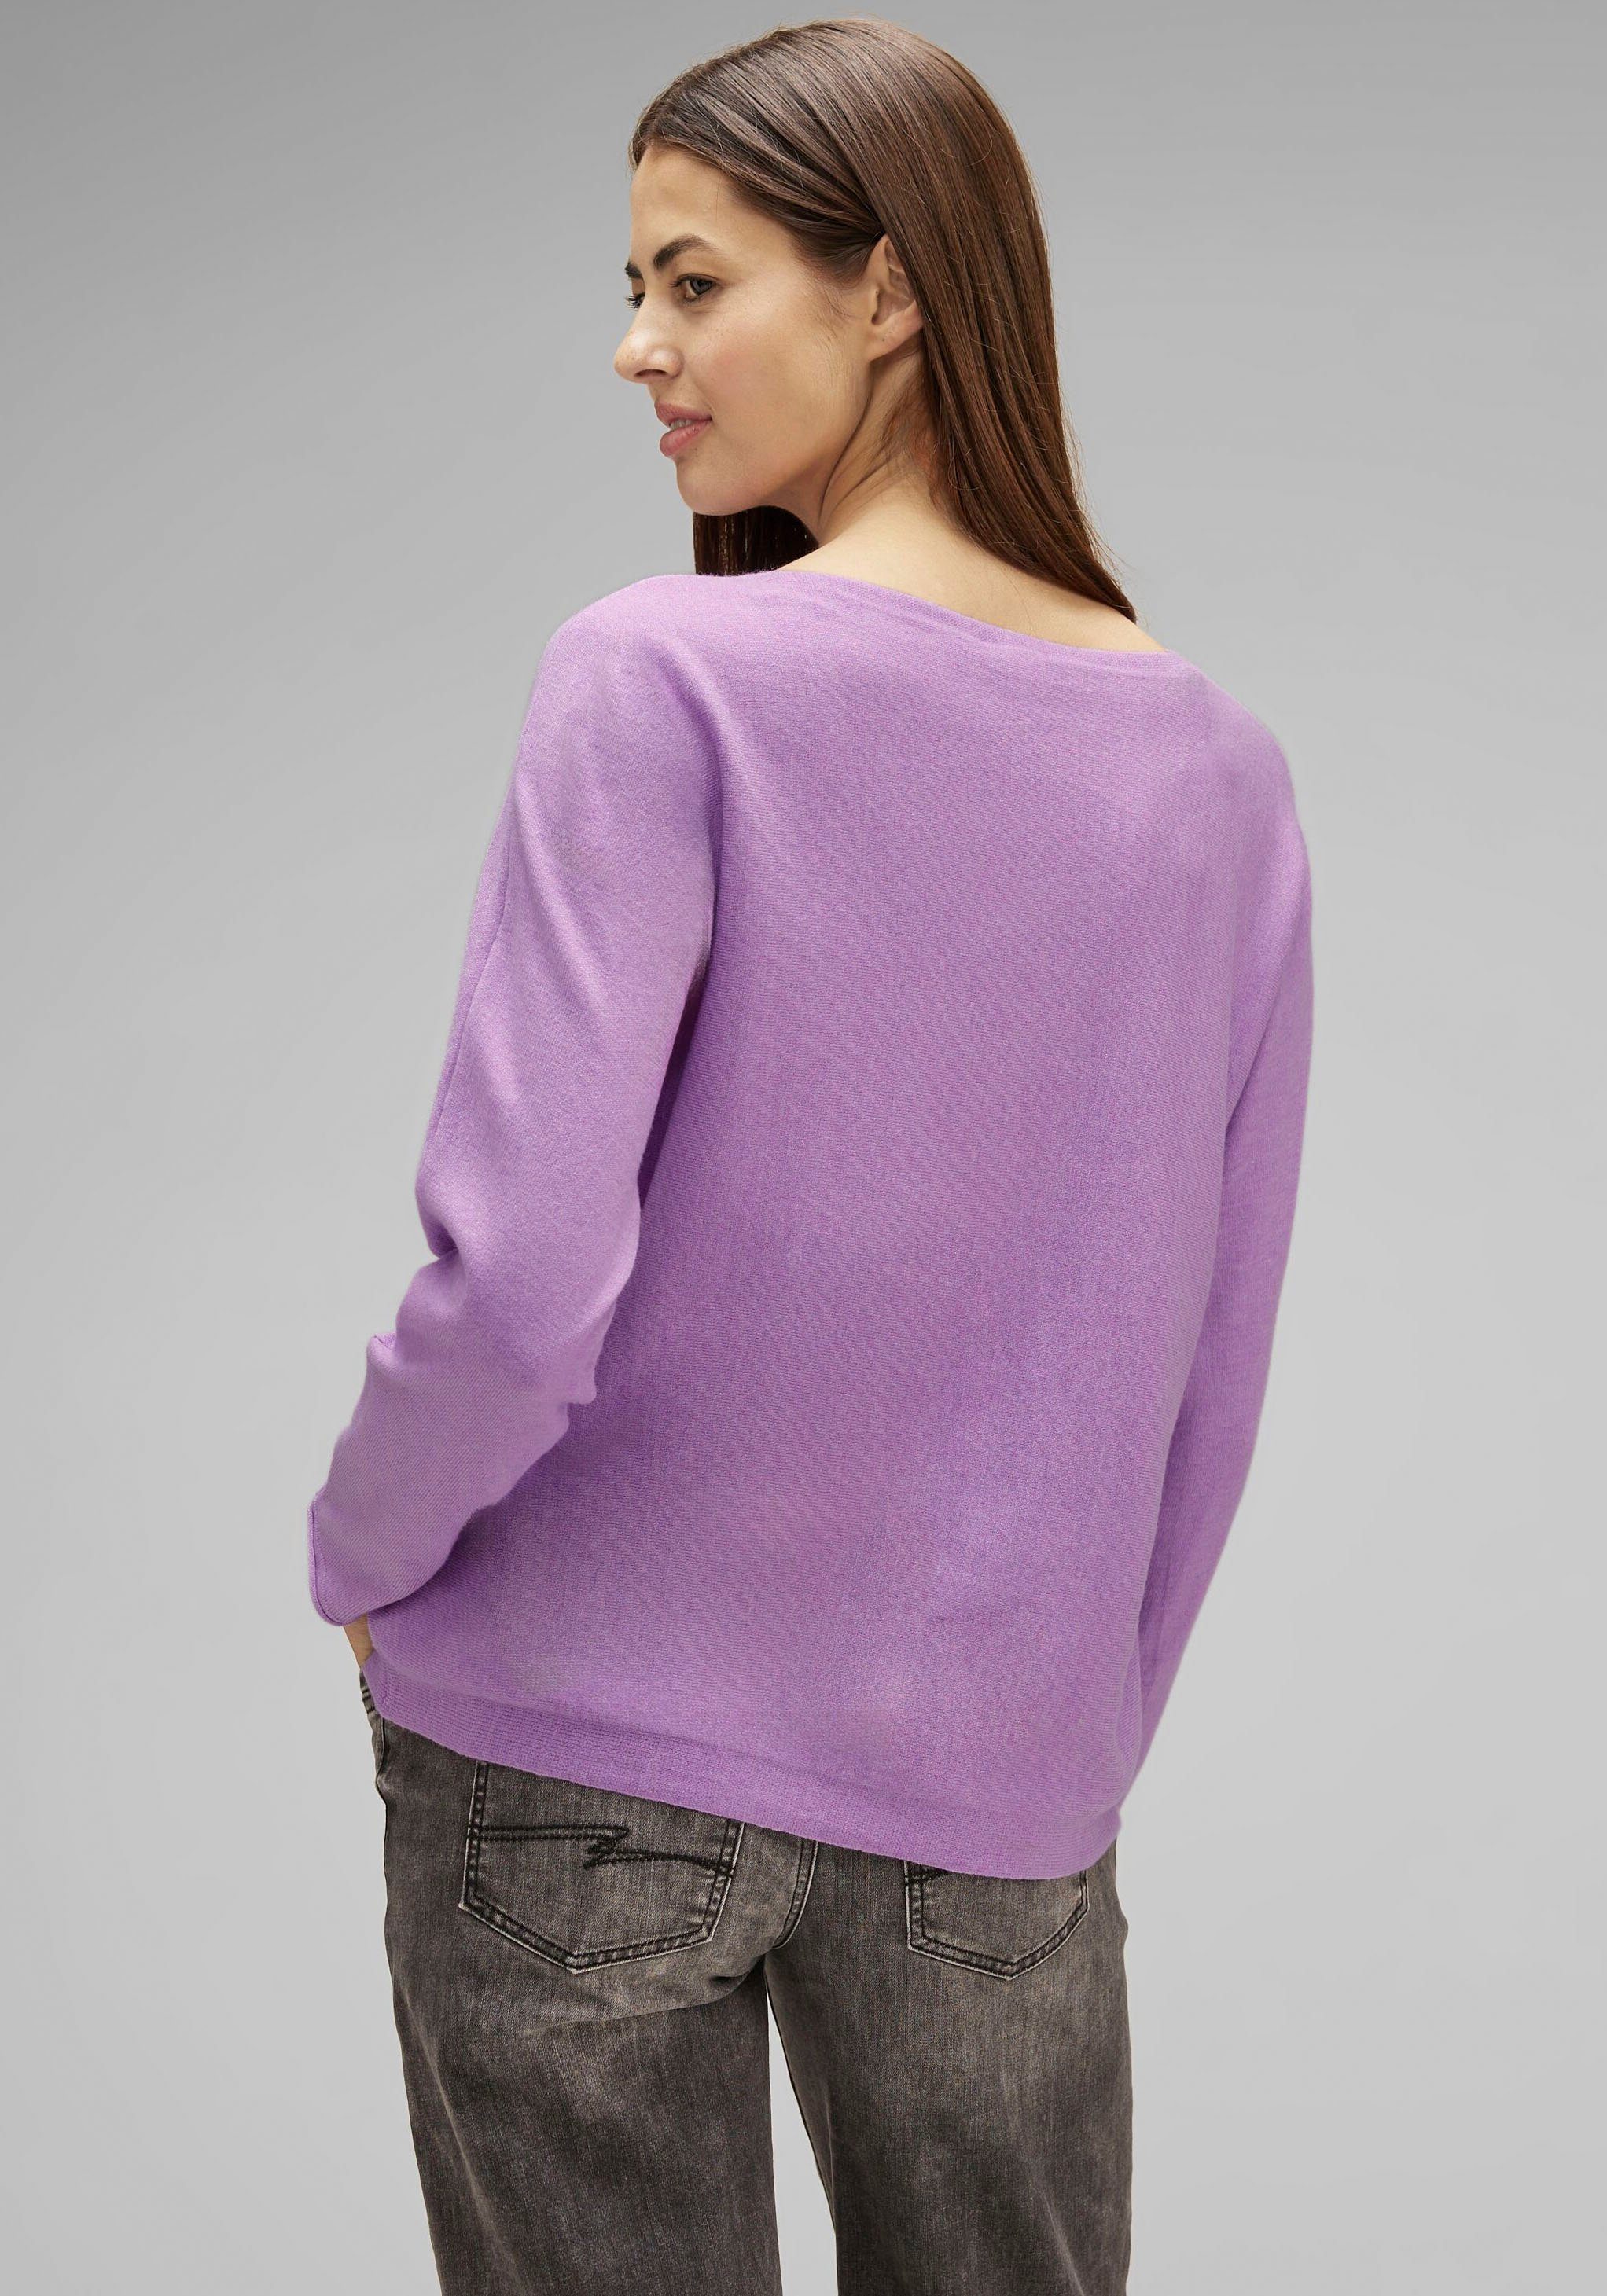 STREET ONE in Strickpullover Unifarbe lilac pure